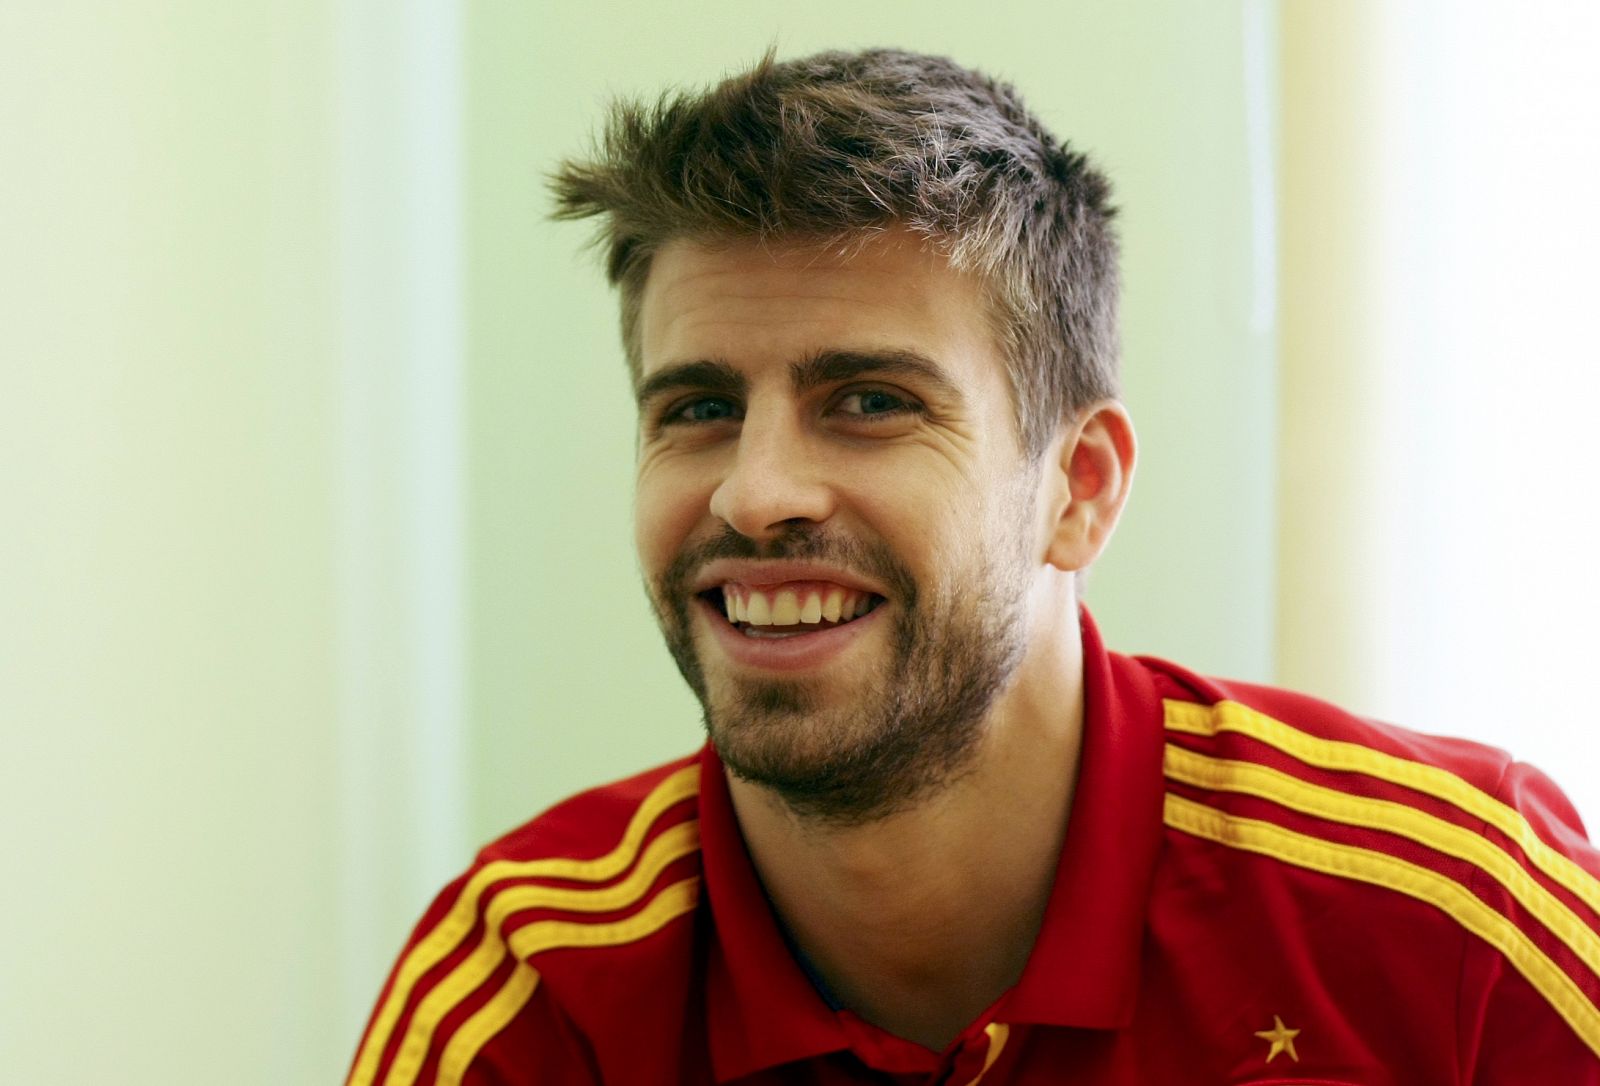 Spain's national soccer player Pique smiles during an interview with Reuters media during the Euro 2012 soccer tournament in Gniewino